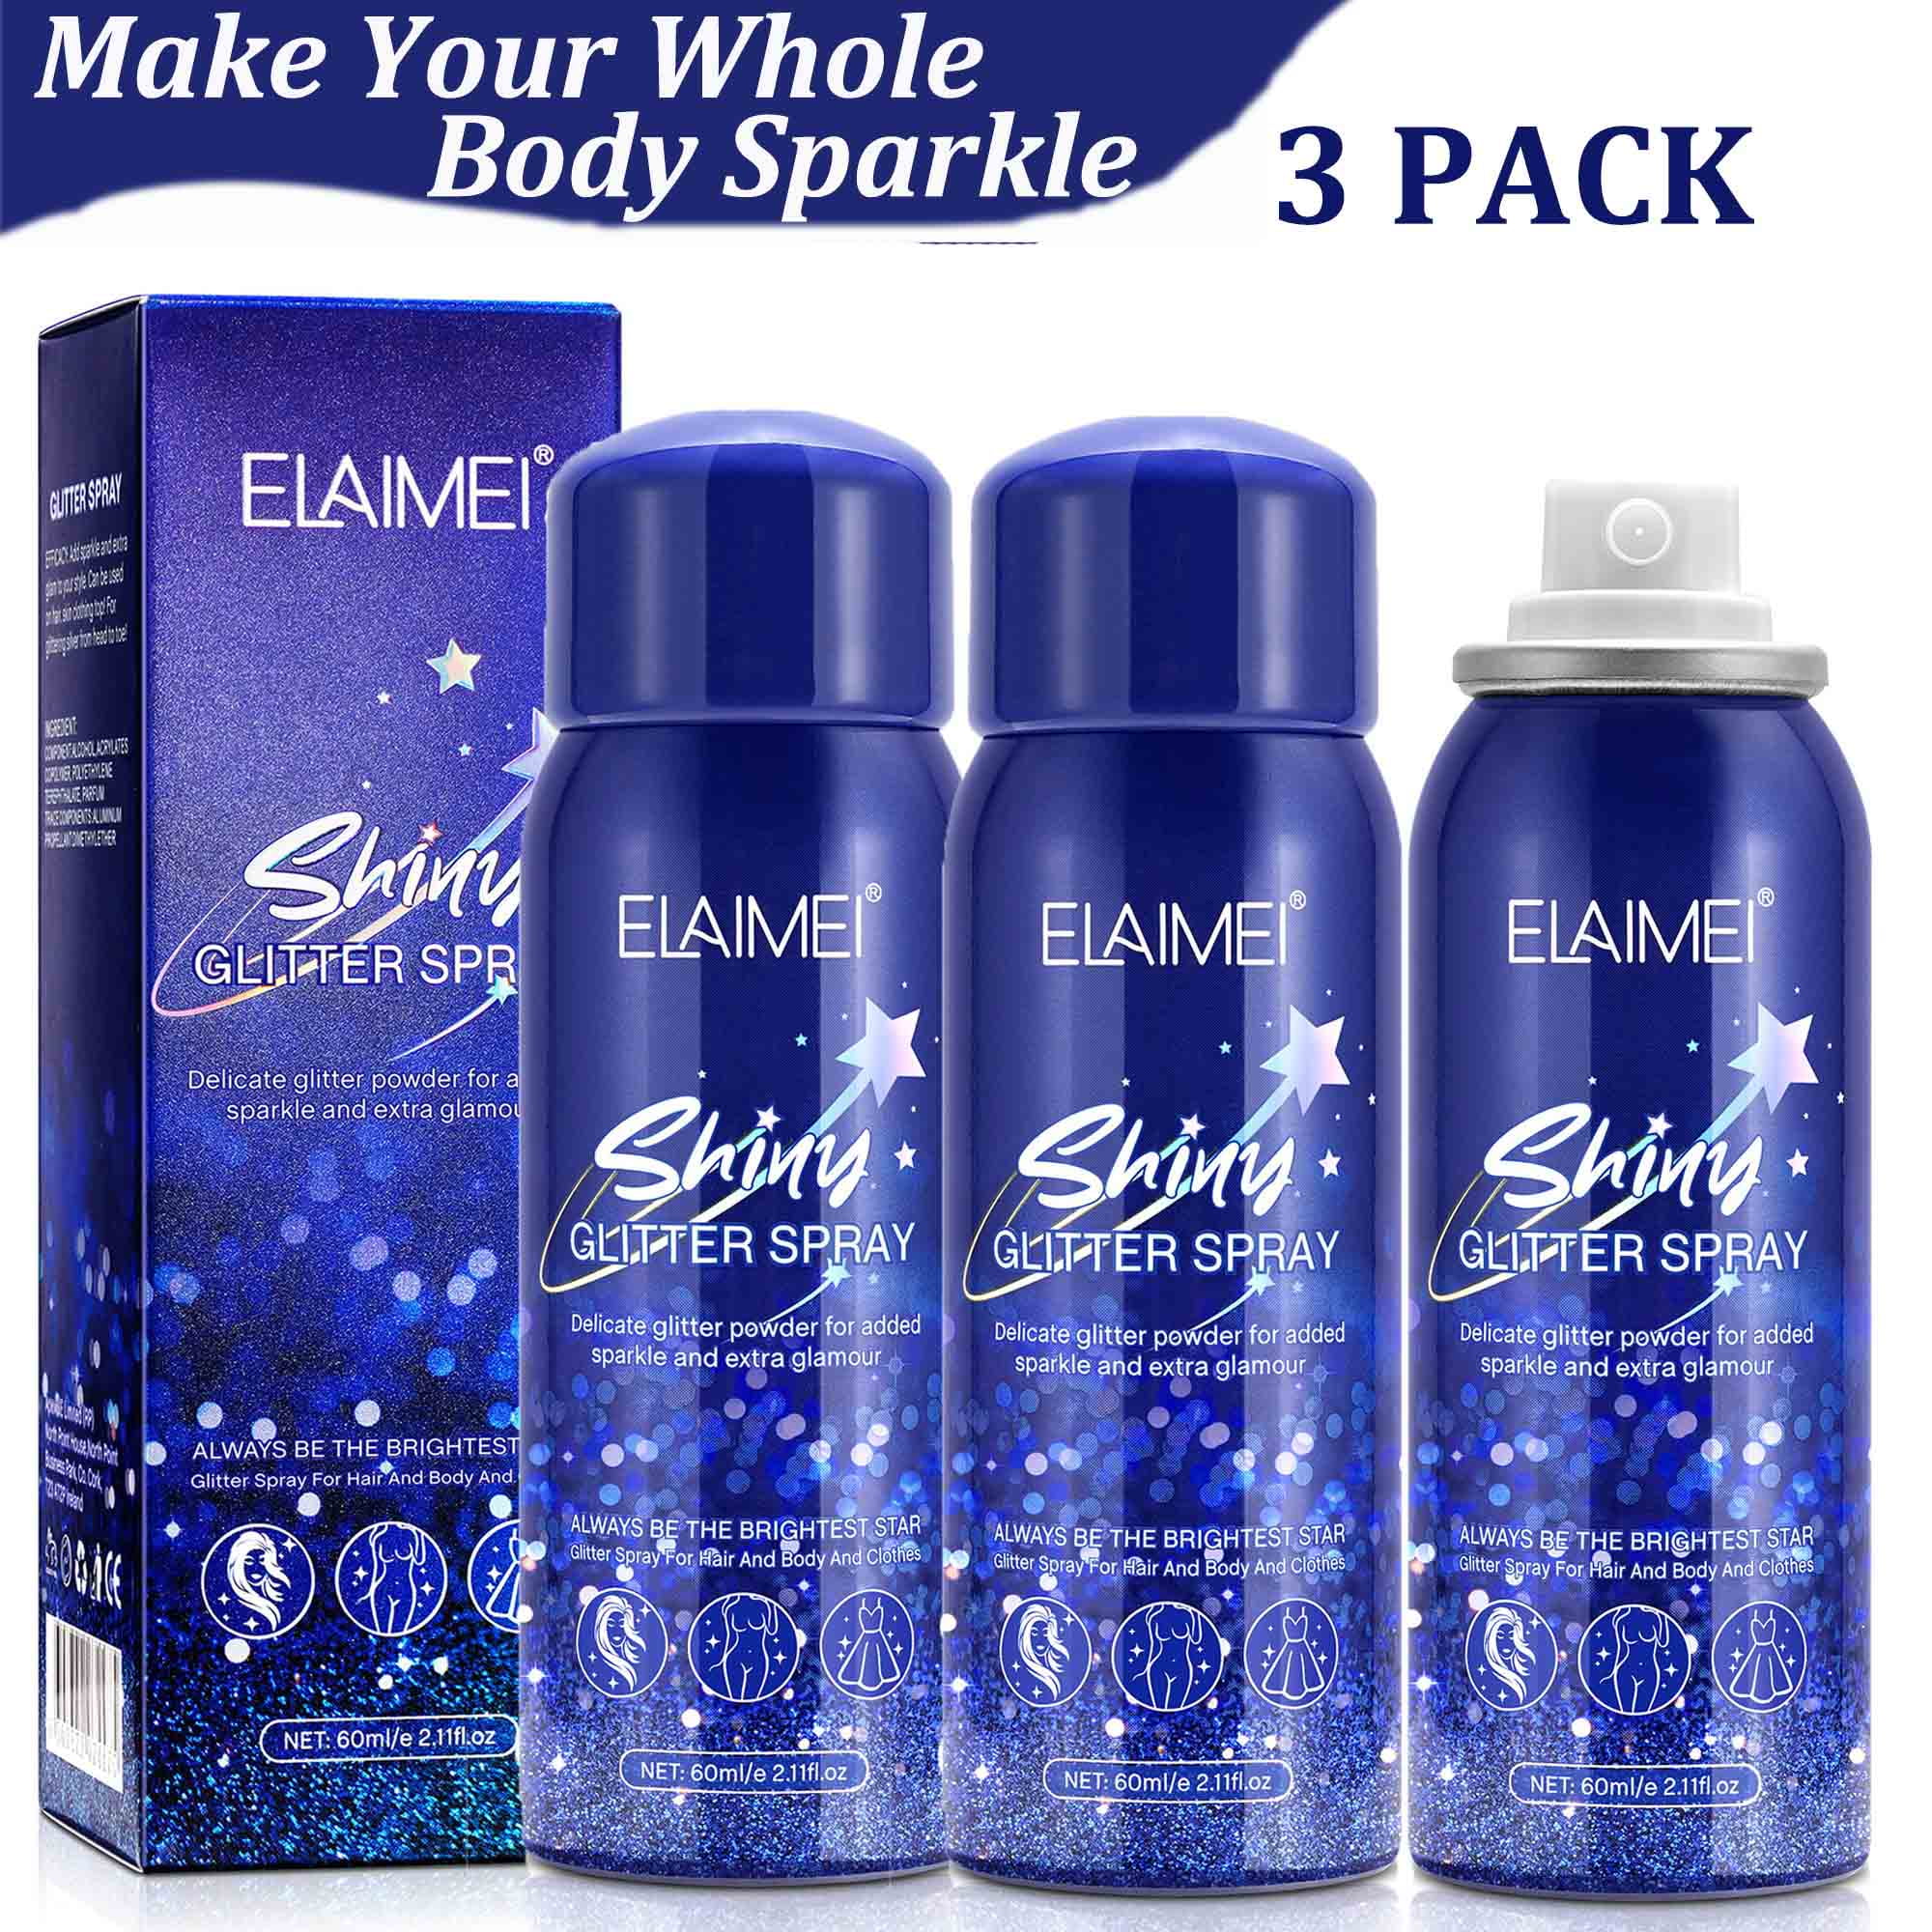 3 Pack Elaimei Shiny Glitter Spray Long Lasting, Glitter Powder Spray for Hair  Body Skin and Clothes,Waterproof & Skin Friendly 